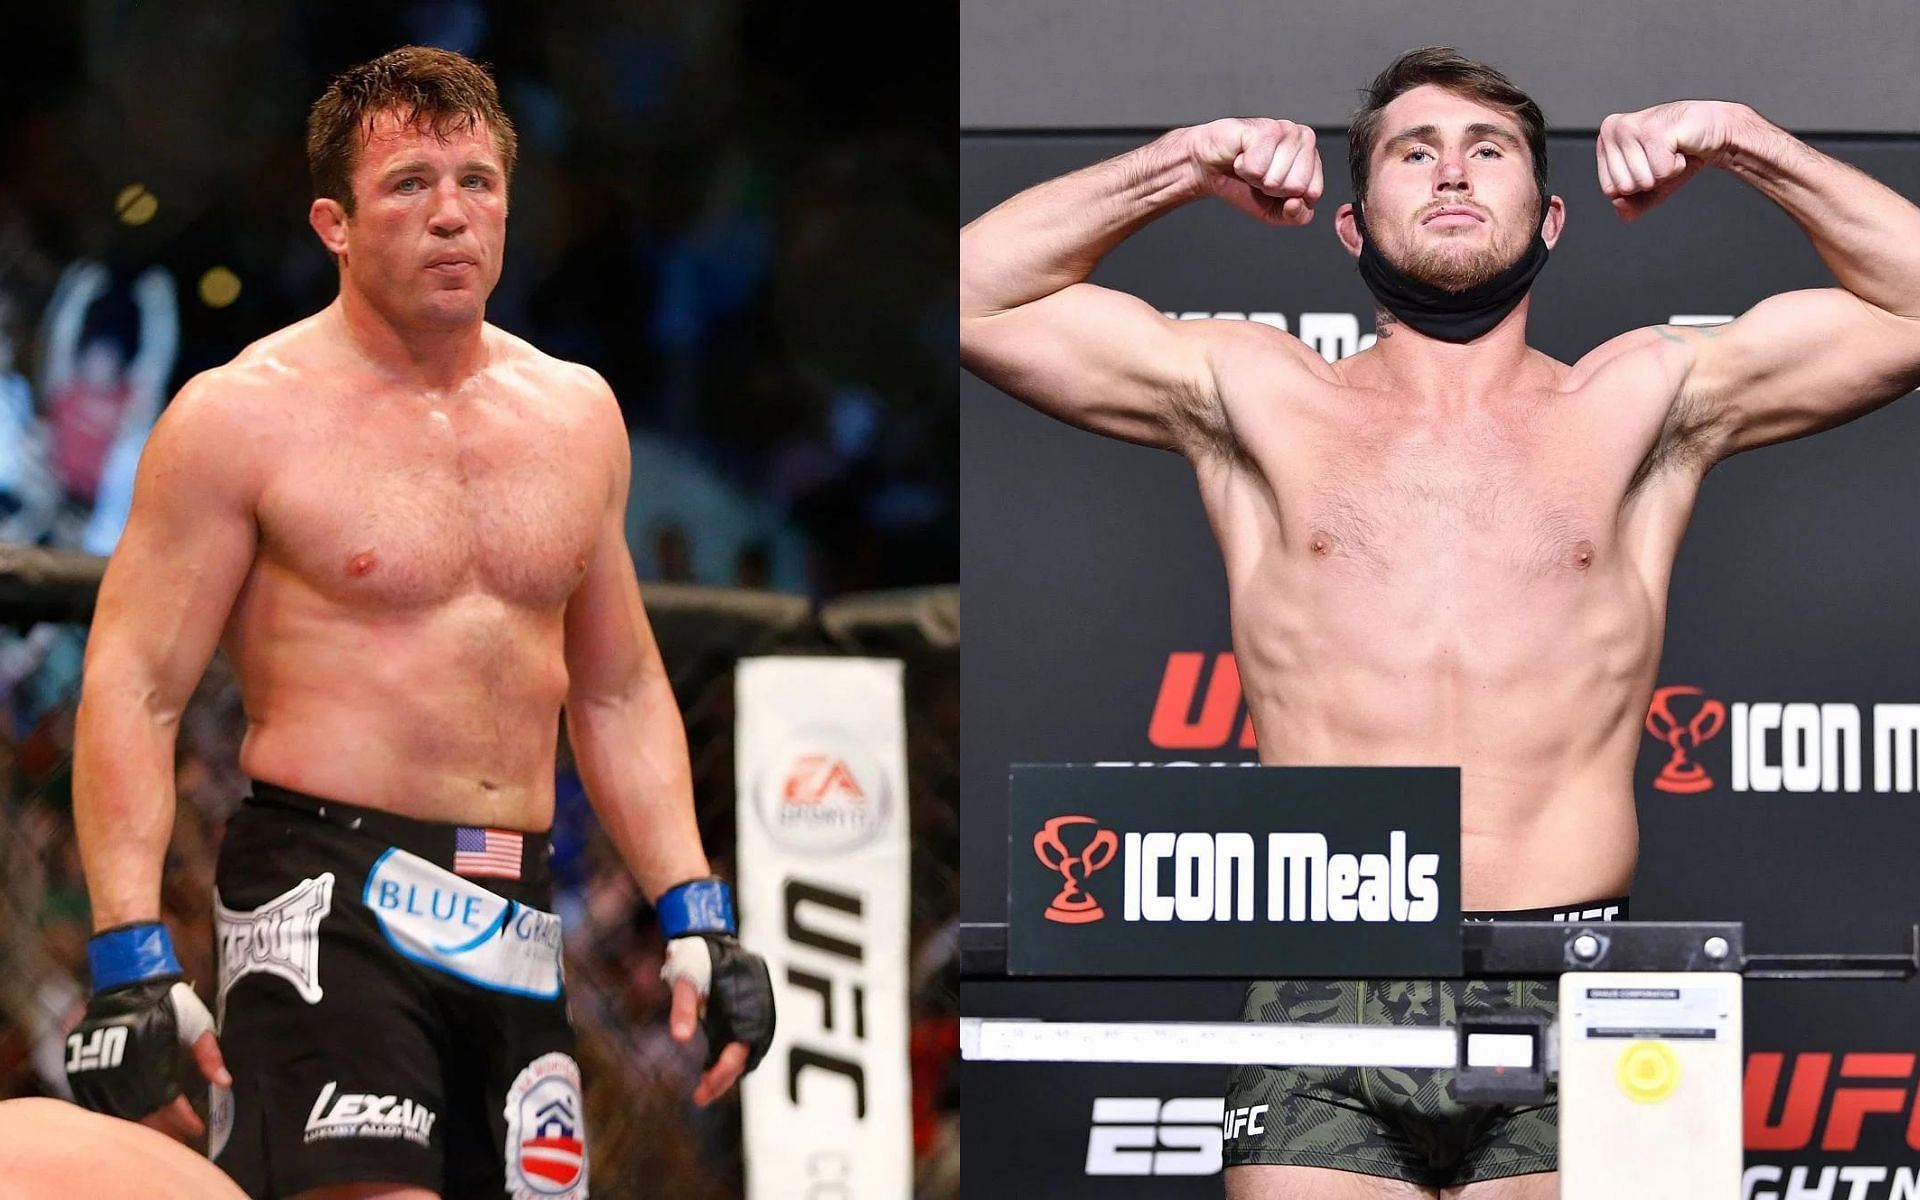 Chael Sonnen (left) and Darren Till (right) [Images courtesy of Getty]